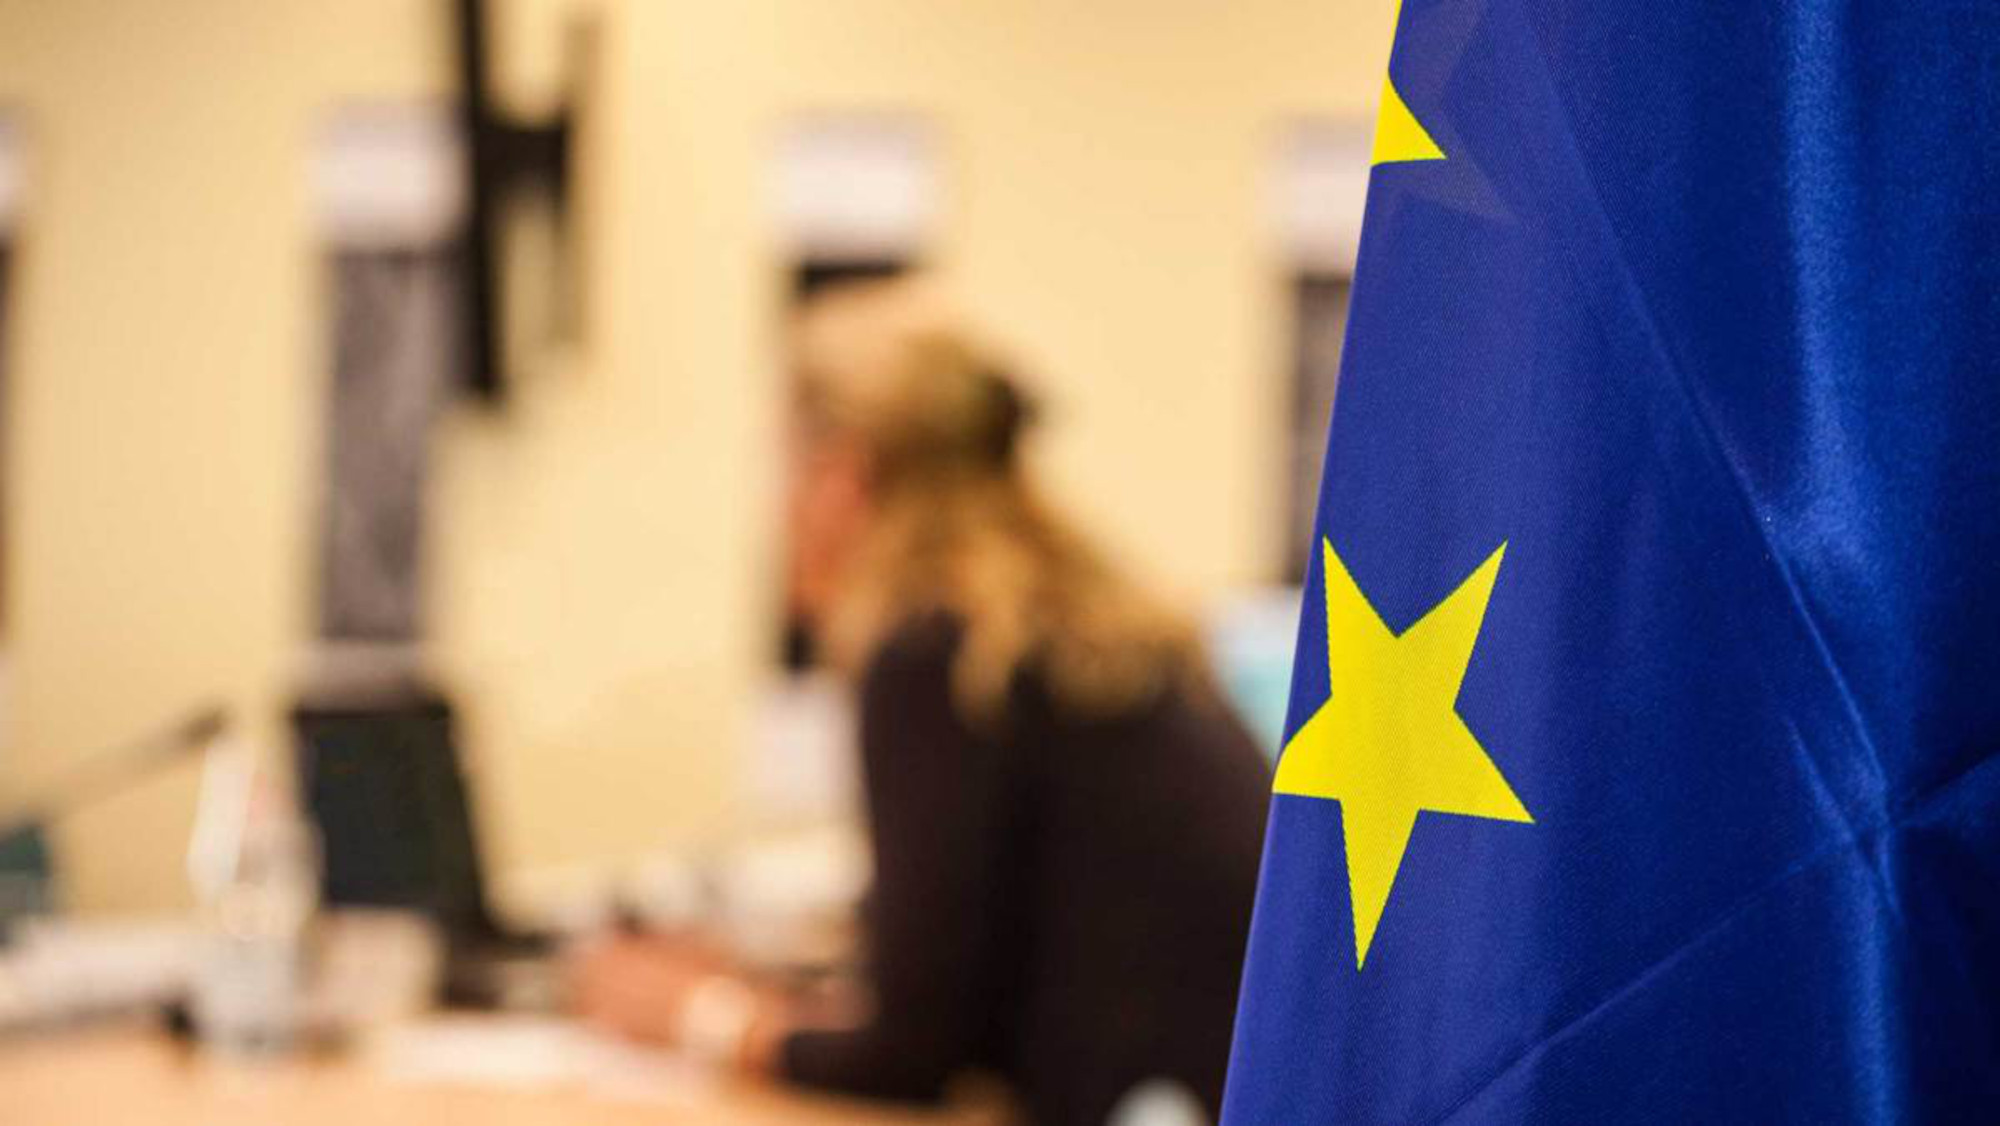 A part of the EU flag is focused in the foreground, in the background a person is sitting at a desk and working on a laptop.